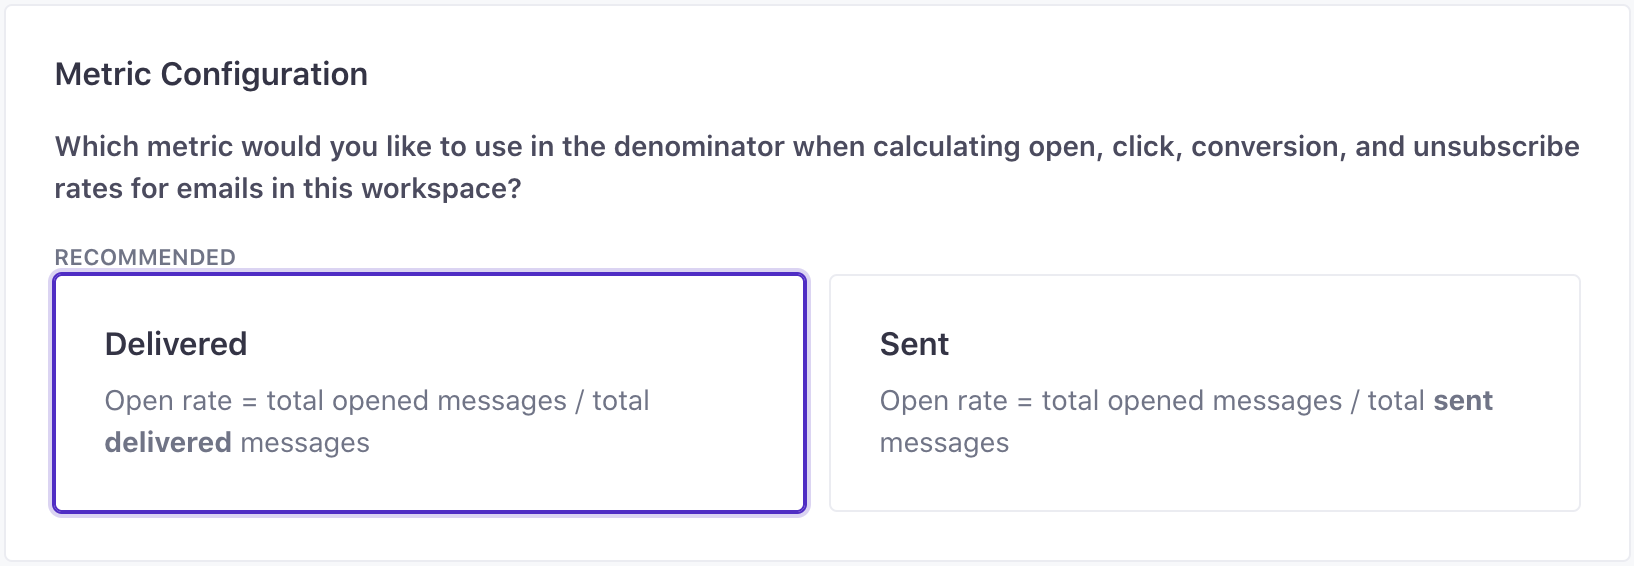 Message metrics are now based on the number of delivered messages